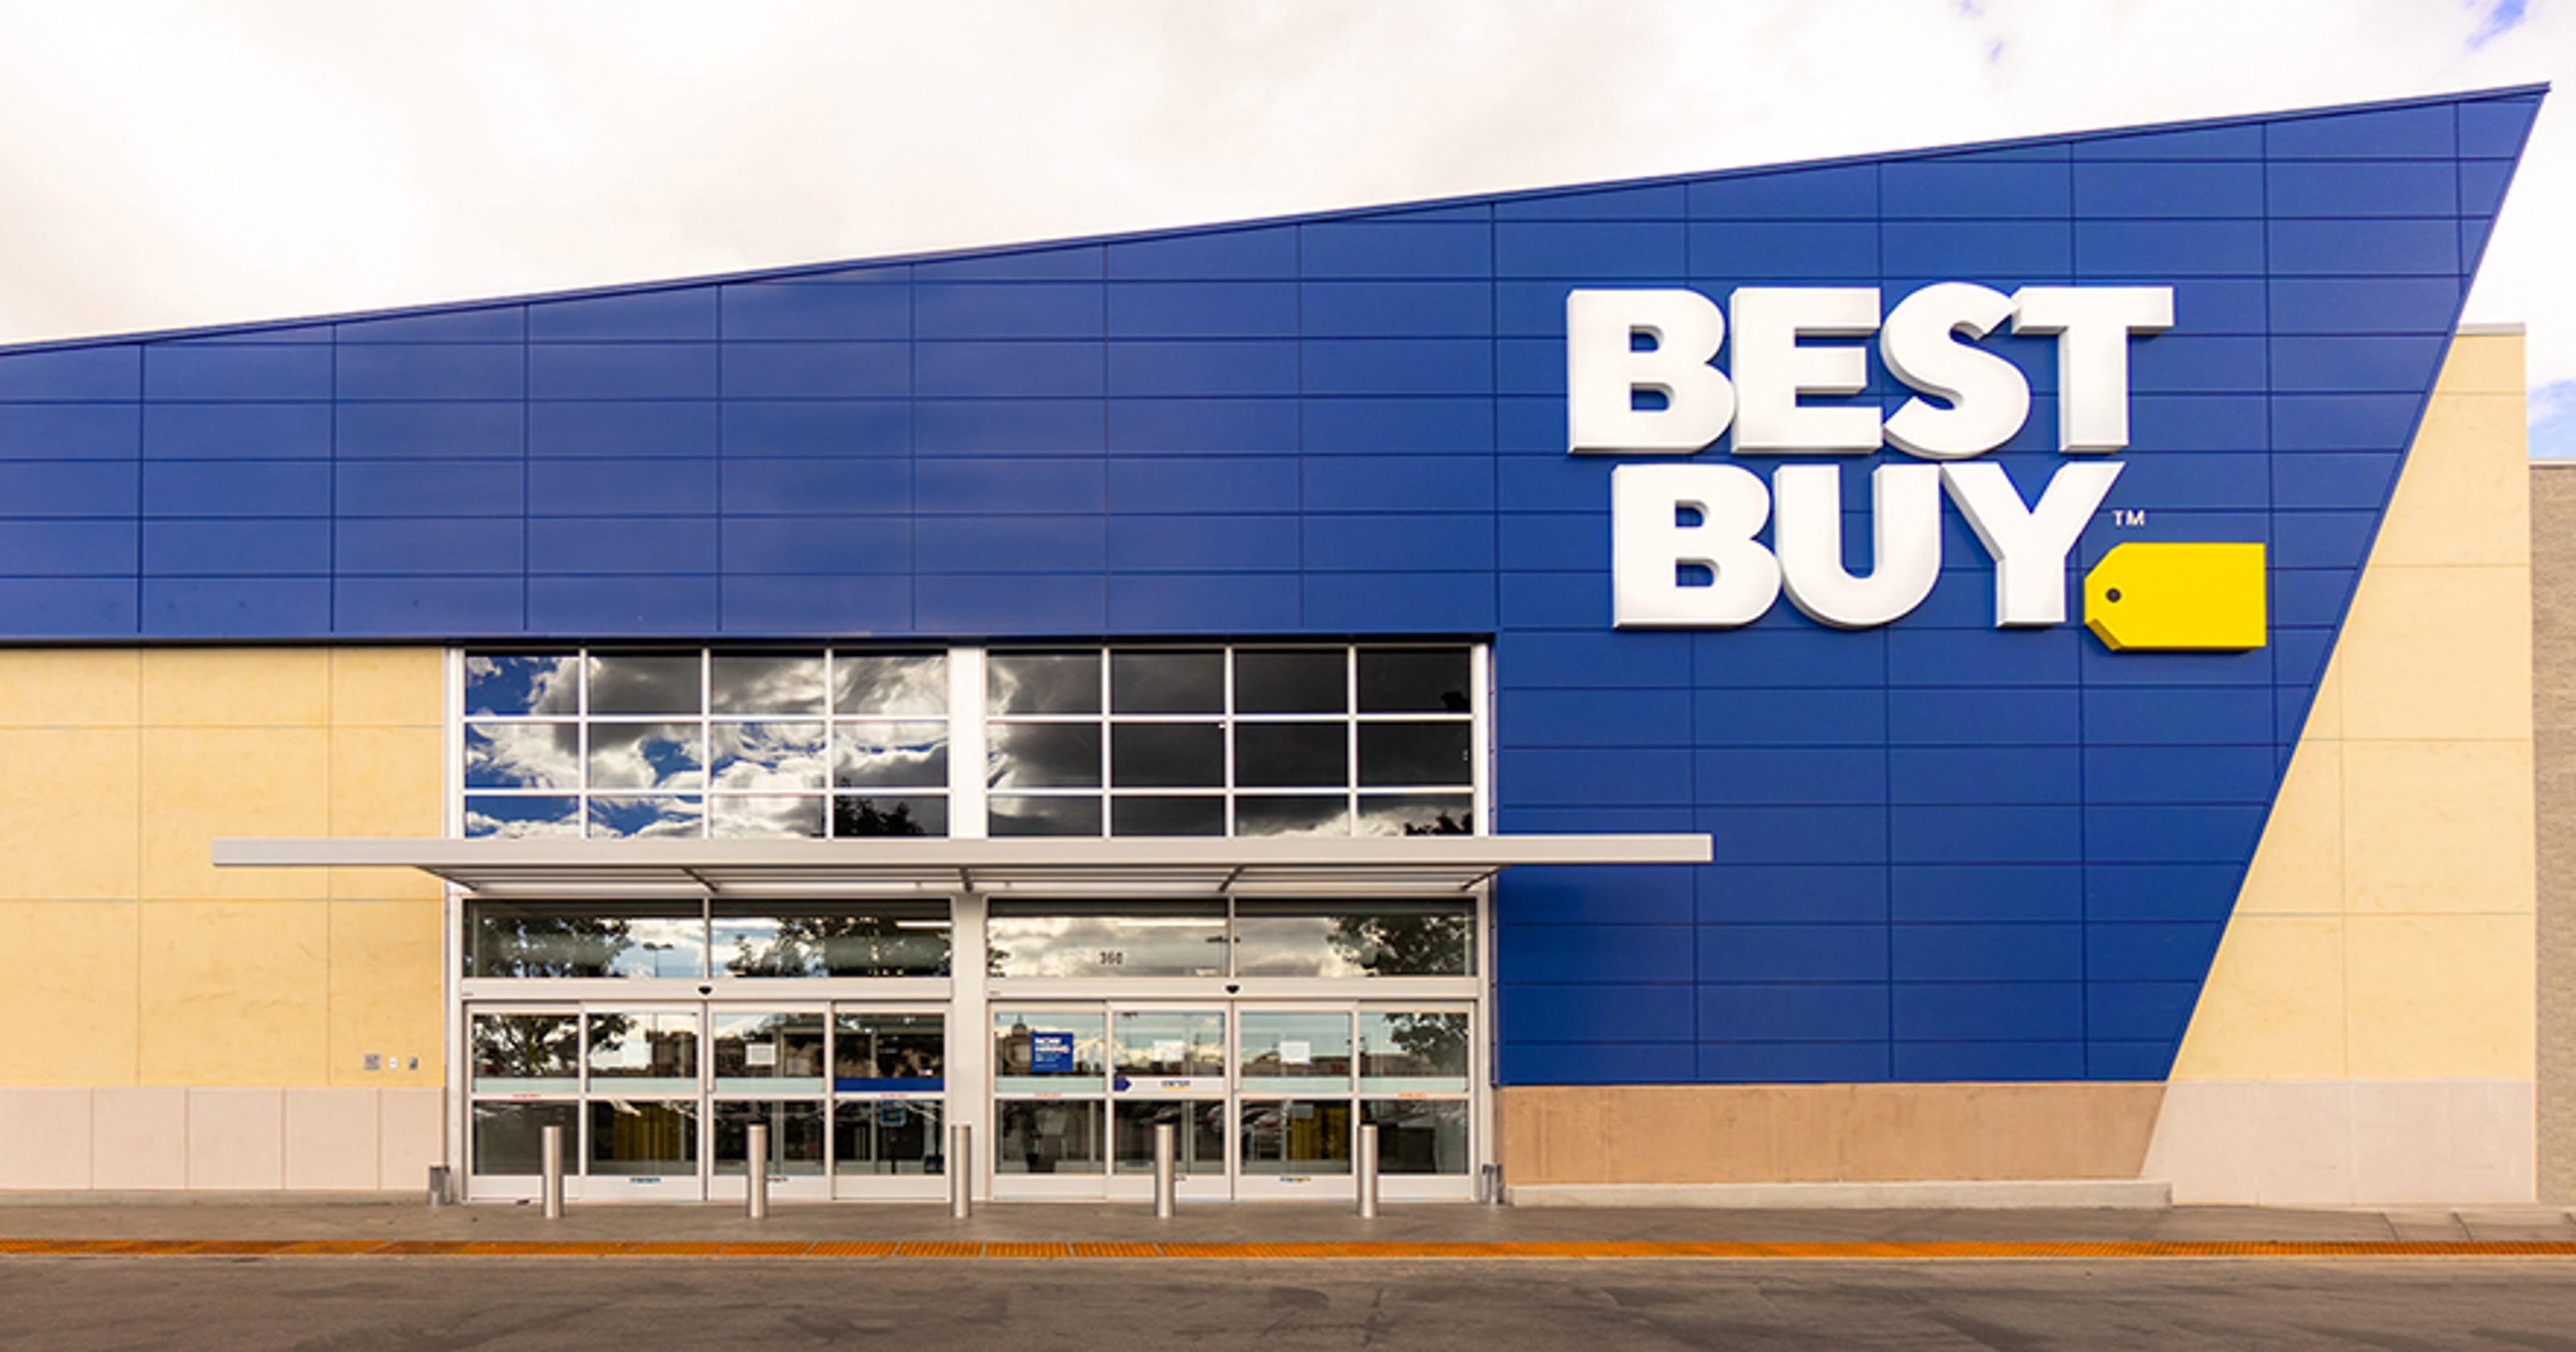 Black Friday 2018: Best Buy will have huge discounts on TVs and other electronics3200 x 1680